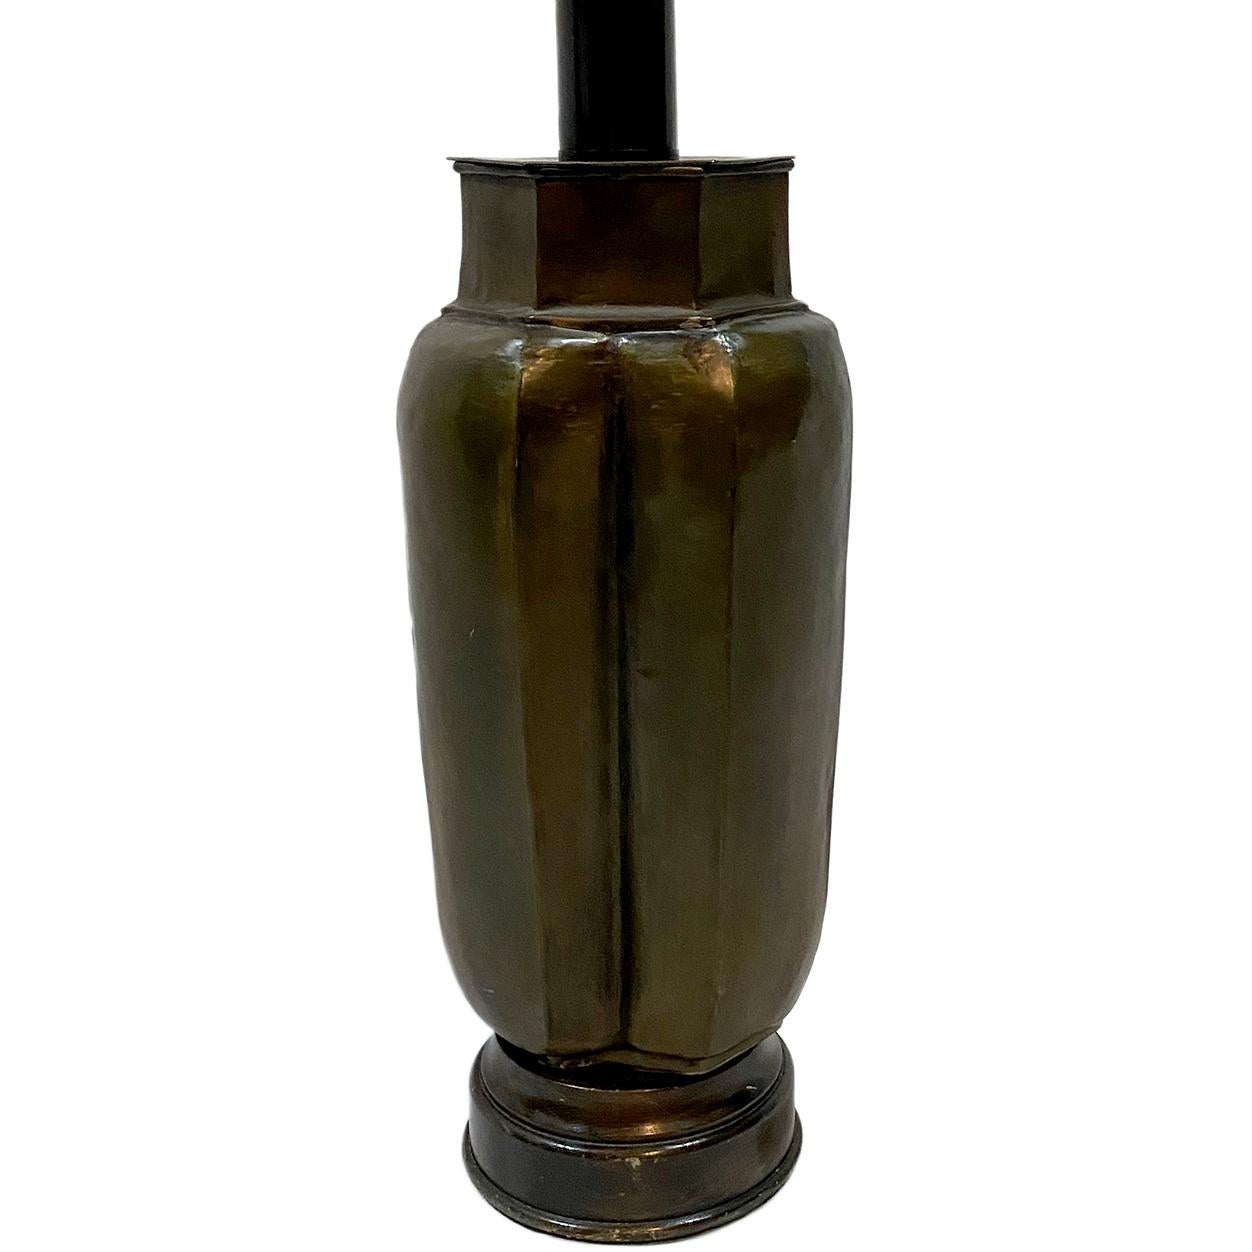 A circa 1950's Italian hammered brass table lamp.

Measurements:
Height of body: 17.5